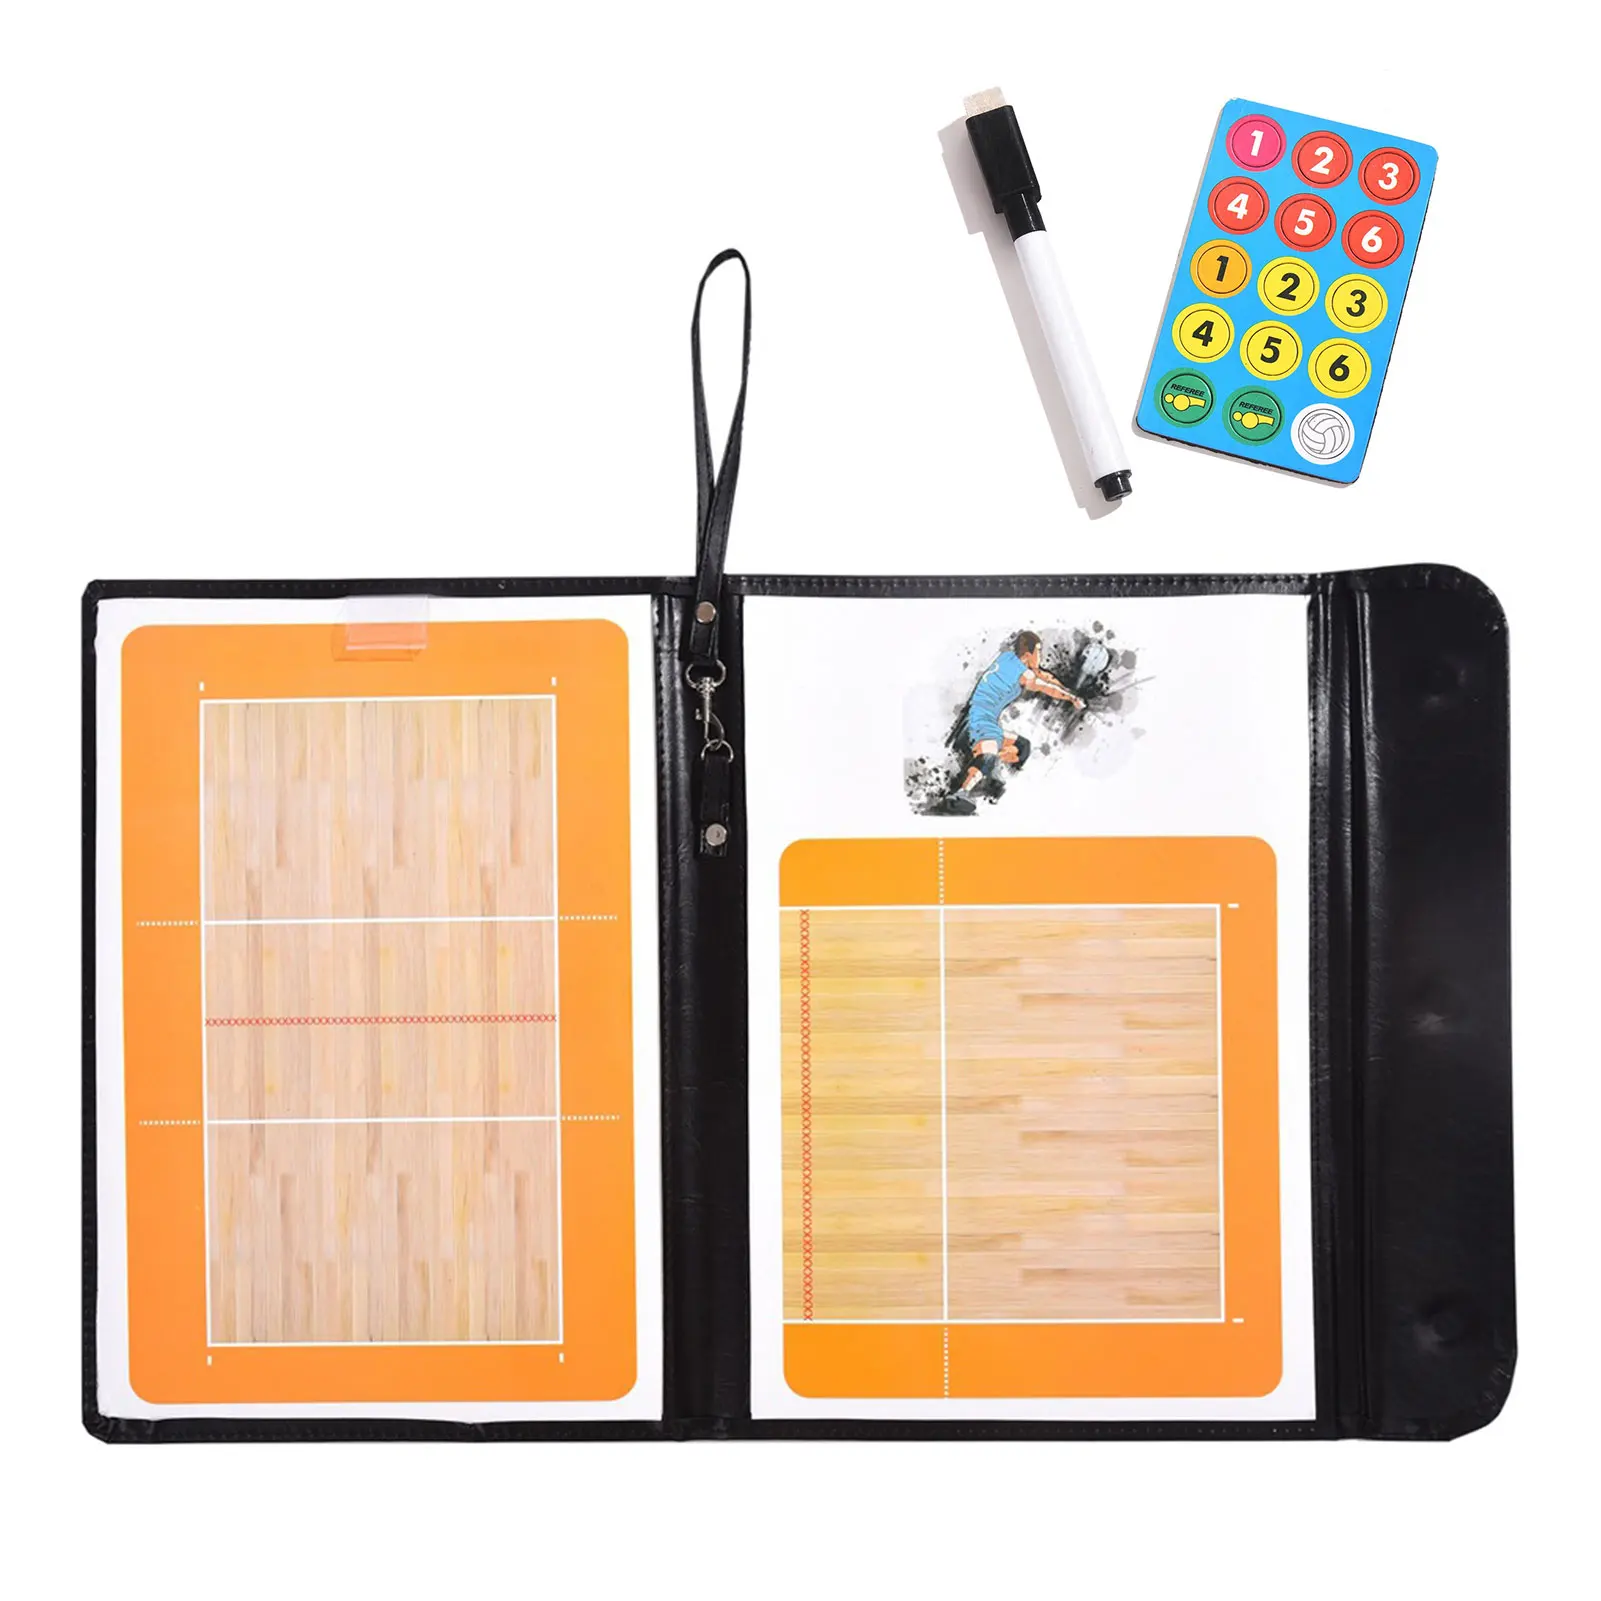 

Coaches Board Collapsible Volleyball Coaching Board For Volleyball Training Dry Erase Tactics Coach Board Clipboard With Marker